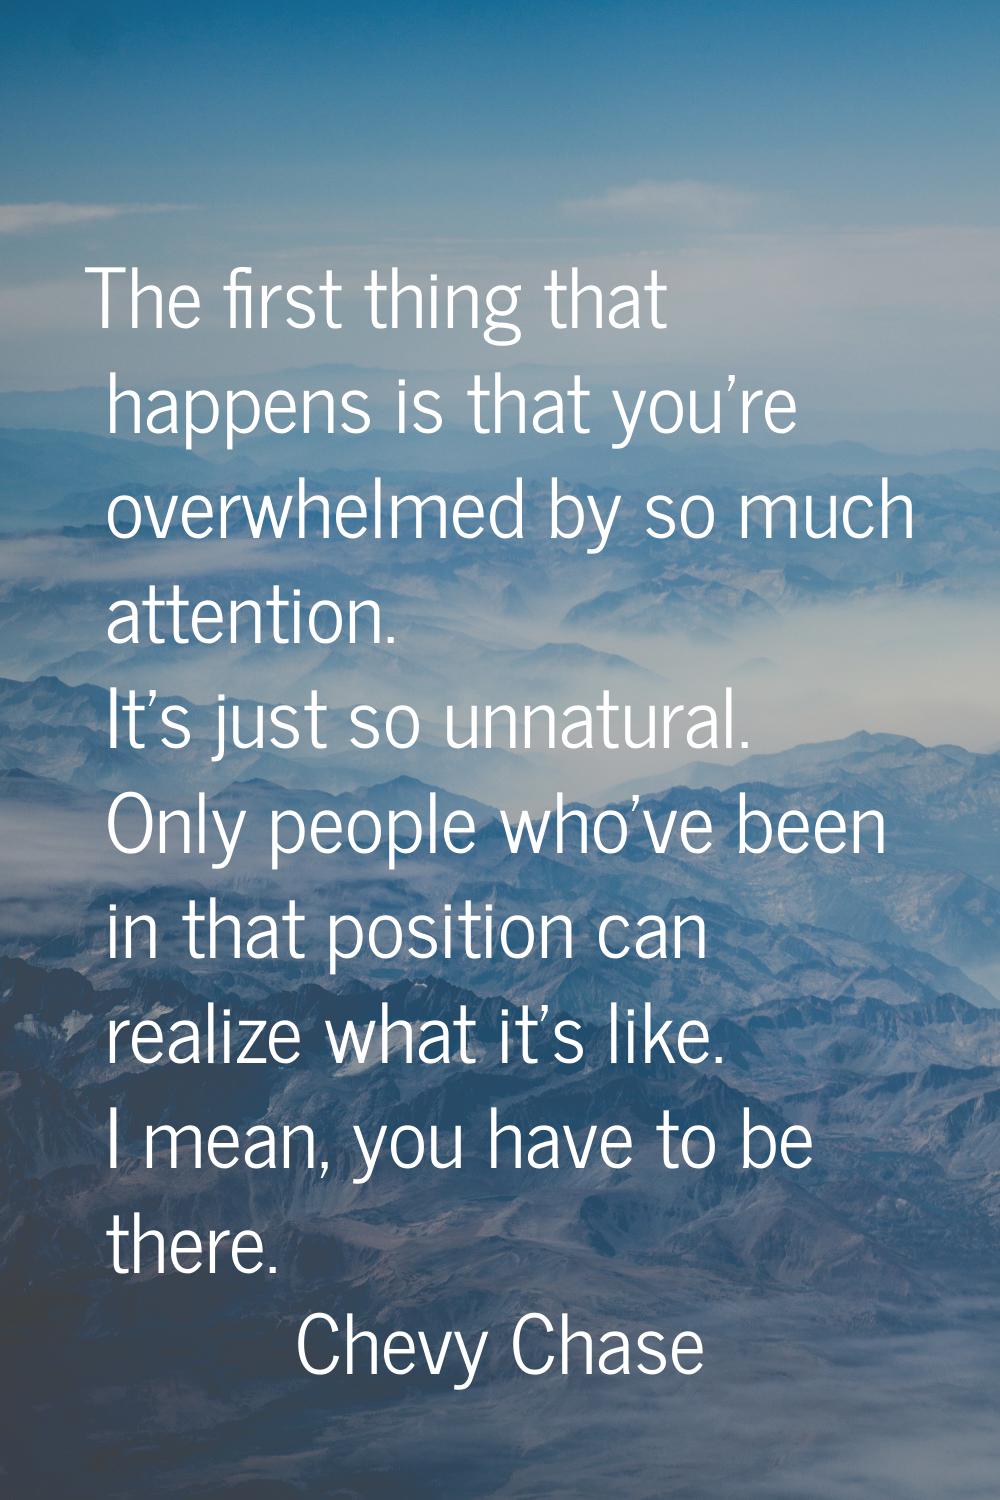 The first thing that happens is that you're overwhelmed by so much attention. It's just so unnatura